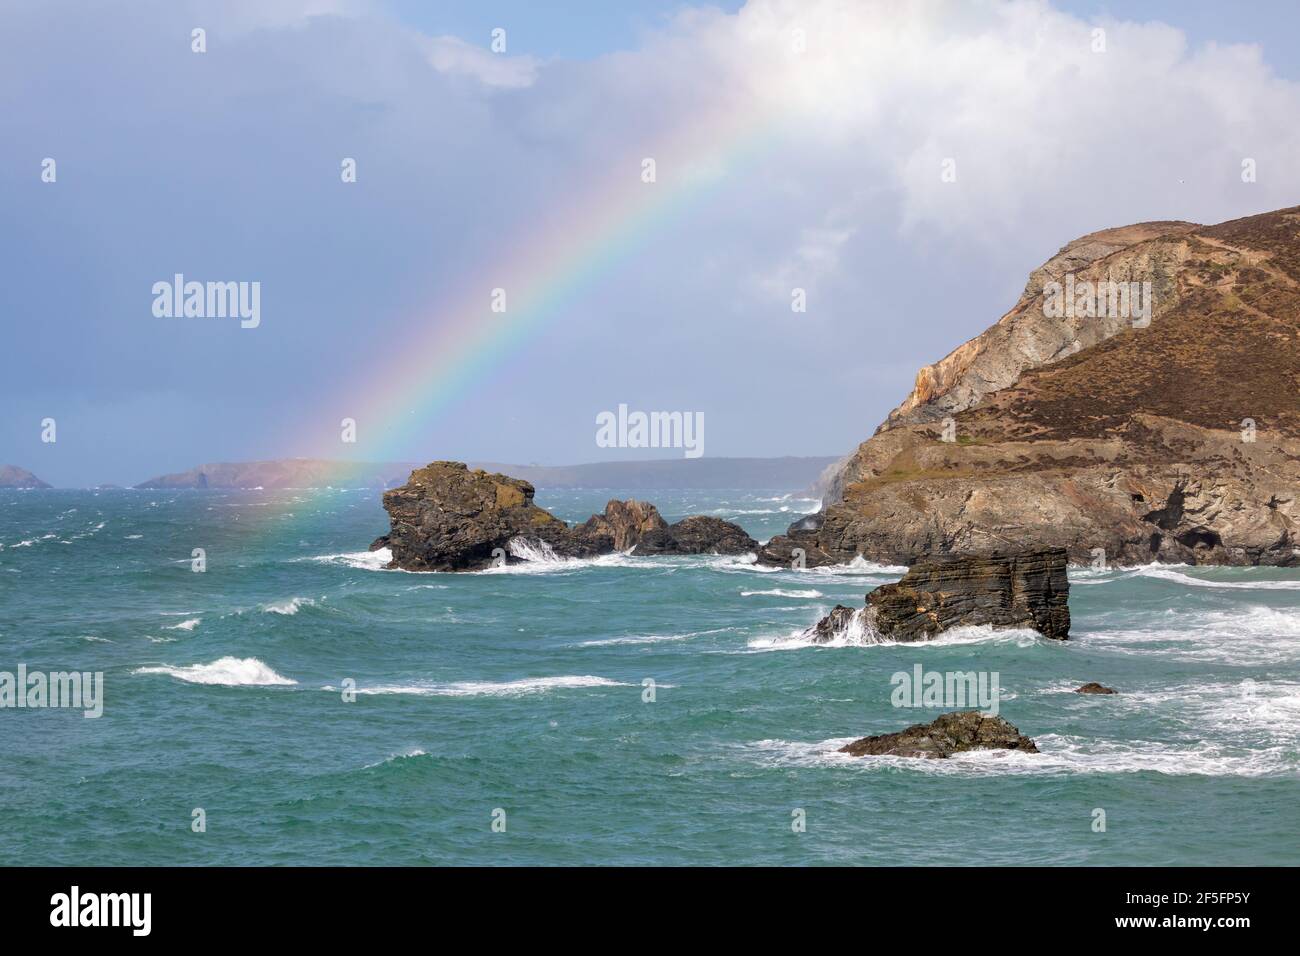 Trevaunance Cove,Cornwall,26th March 2021,After sunshine and showers a colourful rainbow appeared over the sea and cliffs in Trevaunance Cove Cornwall. A seal hung around the cove popping its head out of the water to look around occasionally. Credit: Keith Larby/Alamy Live News Stock Photo